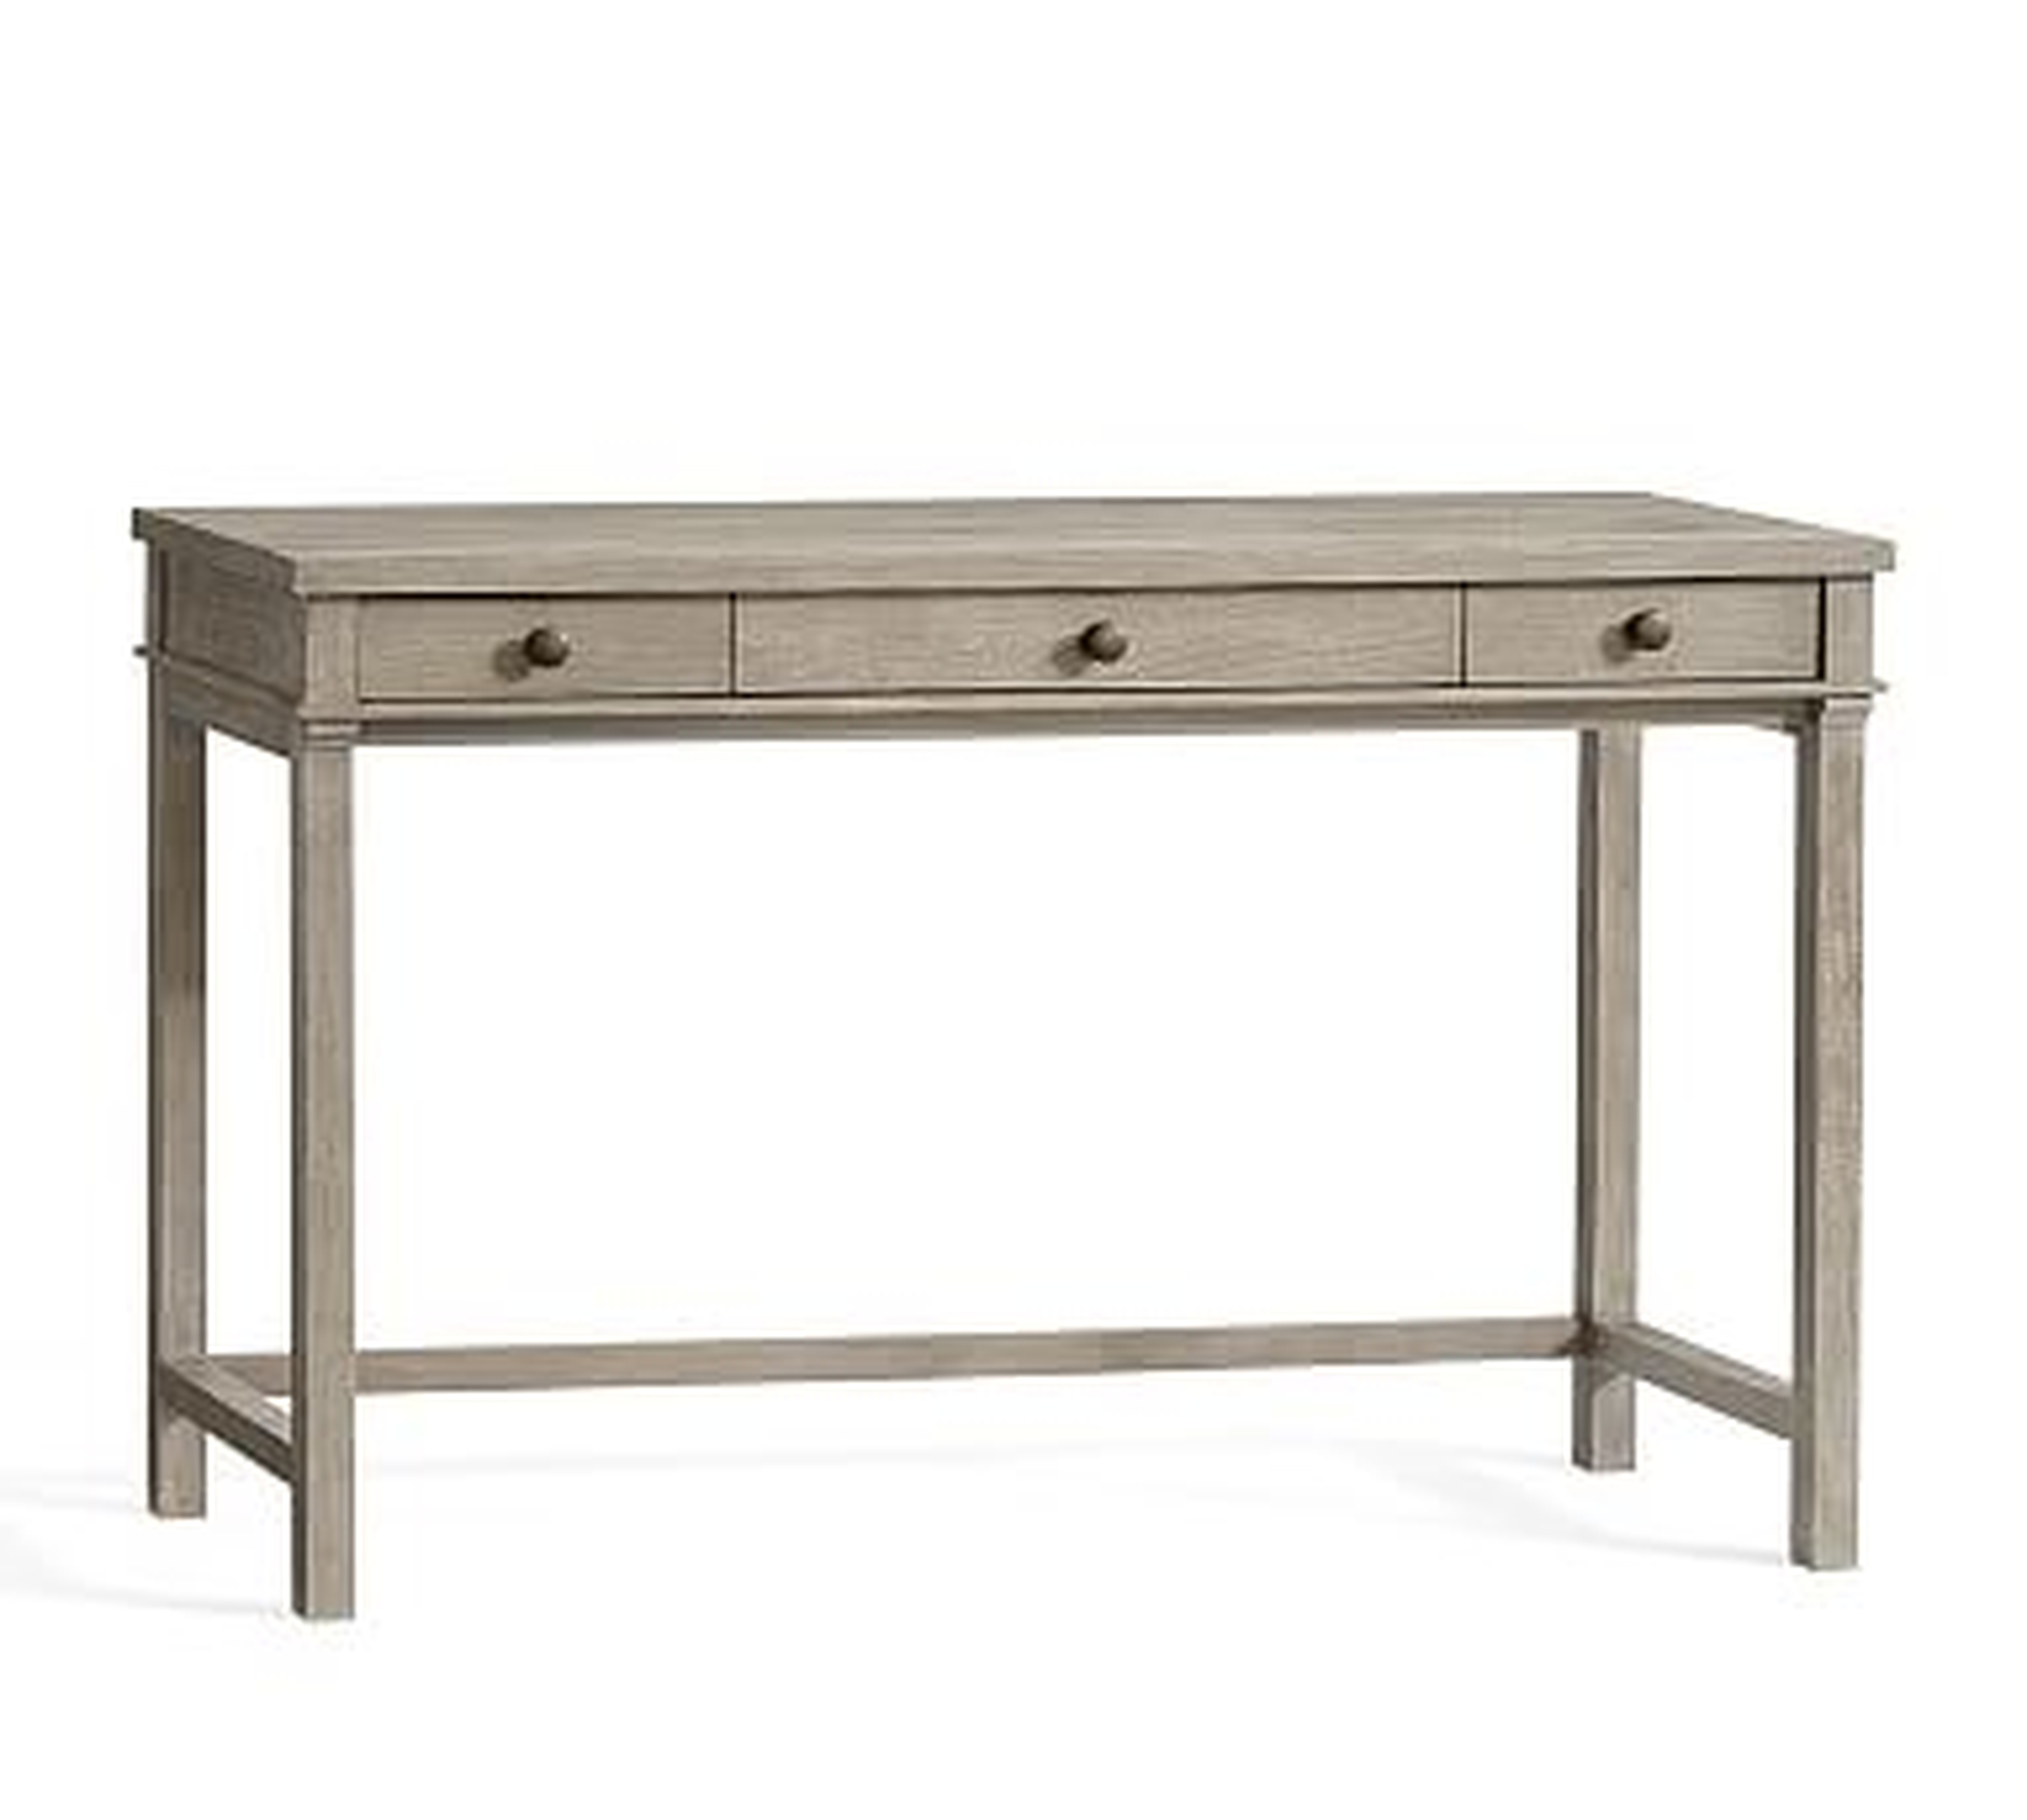 Toulouse 48" Vanity Desk with Drawer, Gray Wash - Pottery Barn